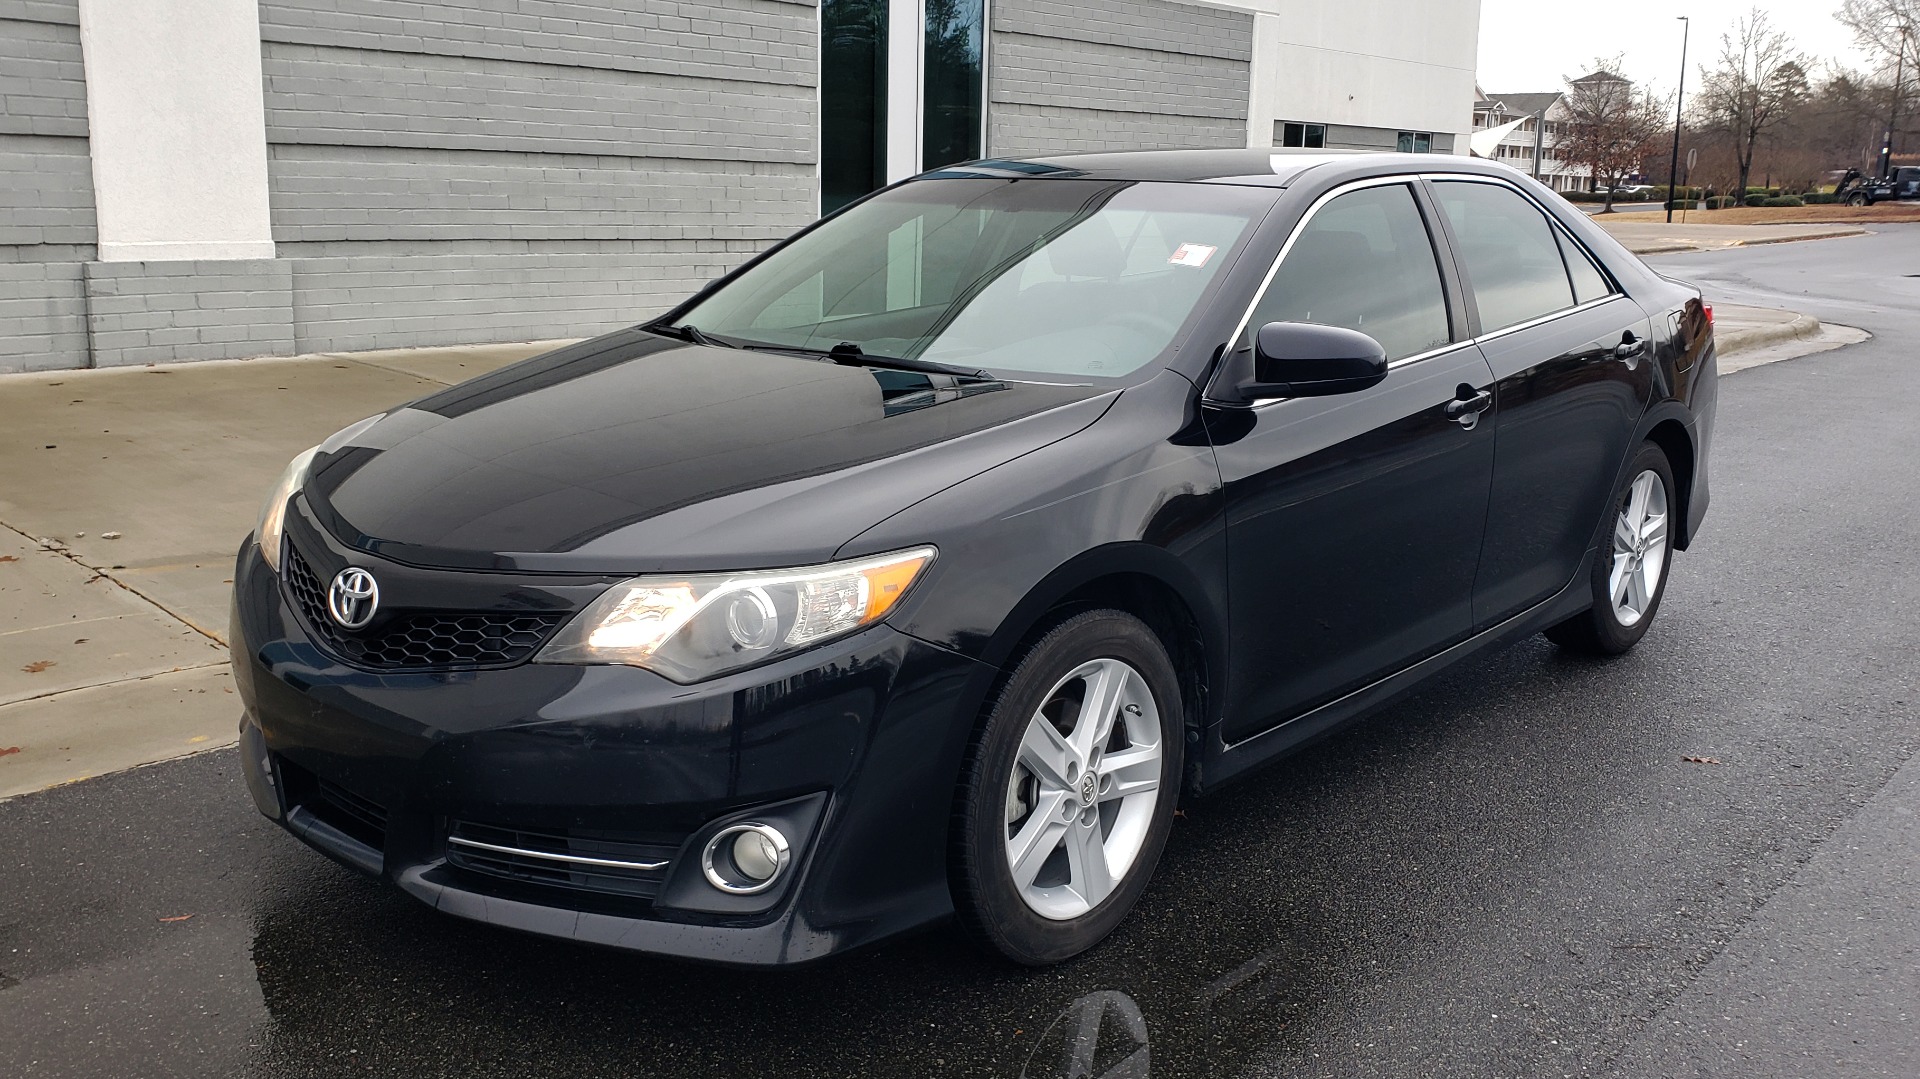 Used 2014 Toyota CAMRY SE SEDAN / 2.5L 4-CYL / 6-SPD AUTO / 17IN ALLOY WHEELS for sale Sold at Formula Imports in Charlotte NC 28227 1